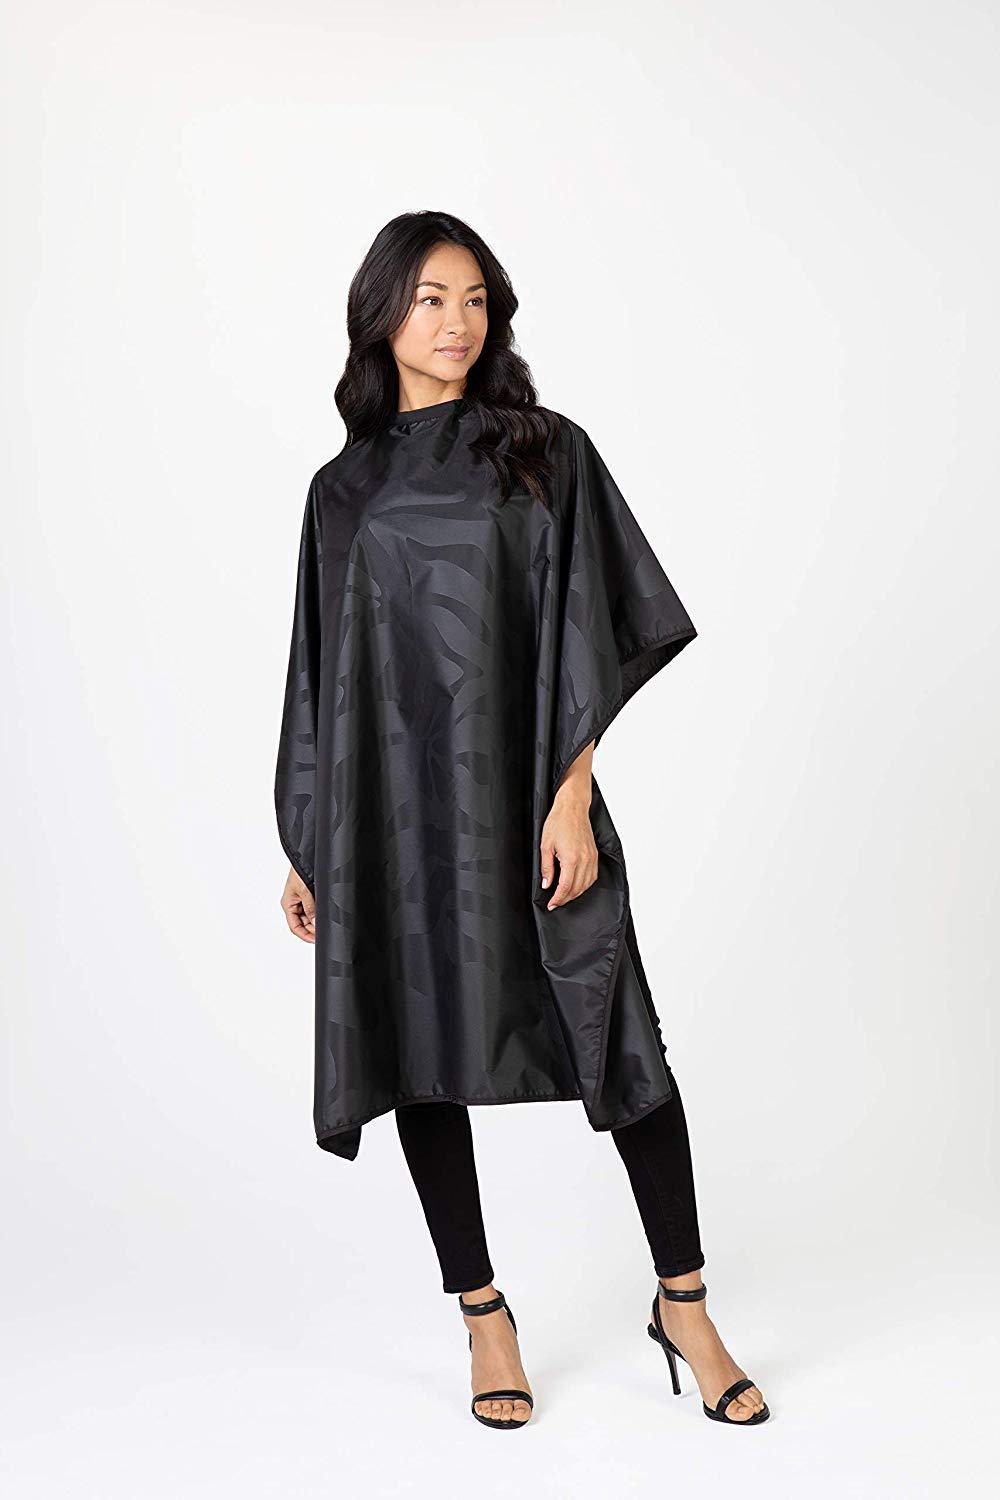 [Australia] - Betty Dain Bleach-proof All Purpose Styling Cape, Material Defends Against Bleach Stains, Color Proof, Chemical Proof, Waterproof, Lightweight Embossed Nylon, Black 